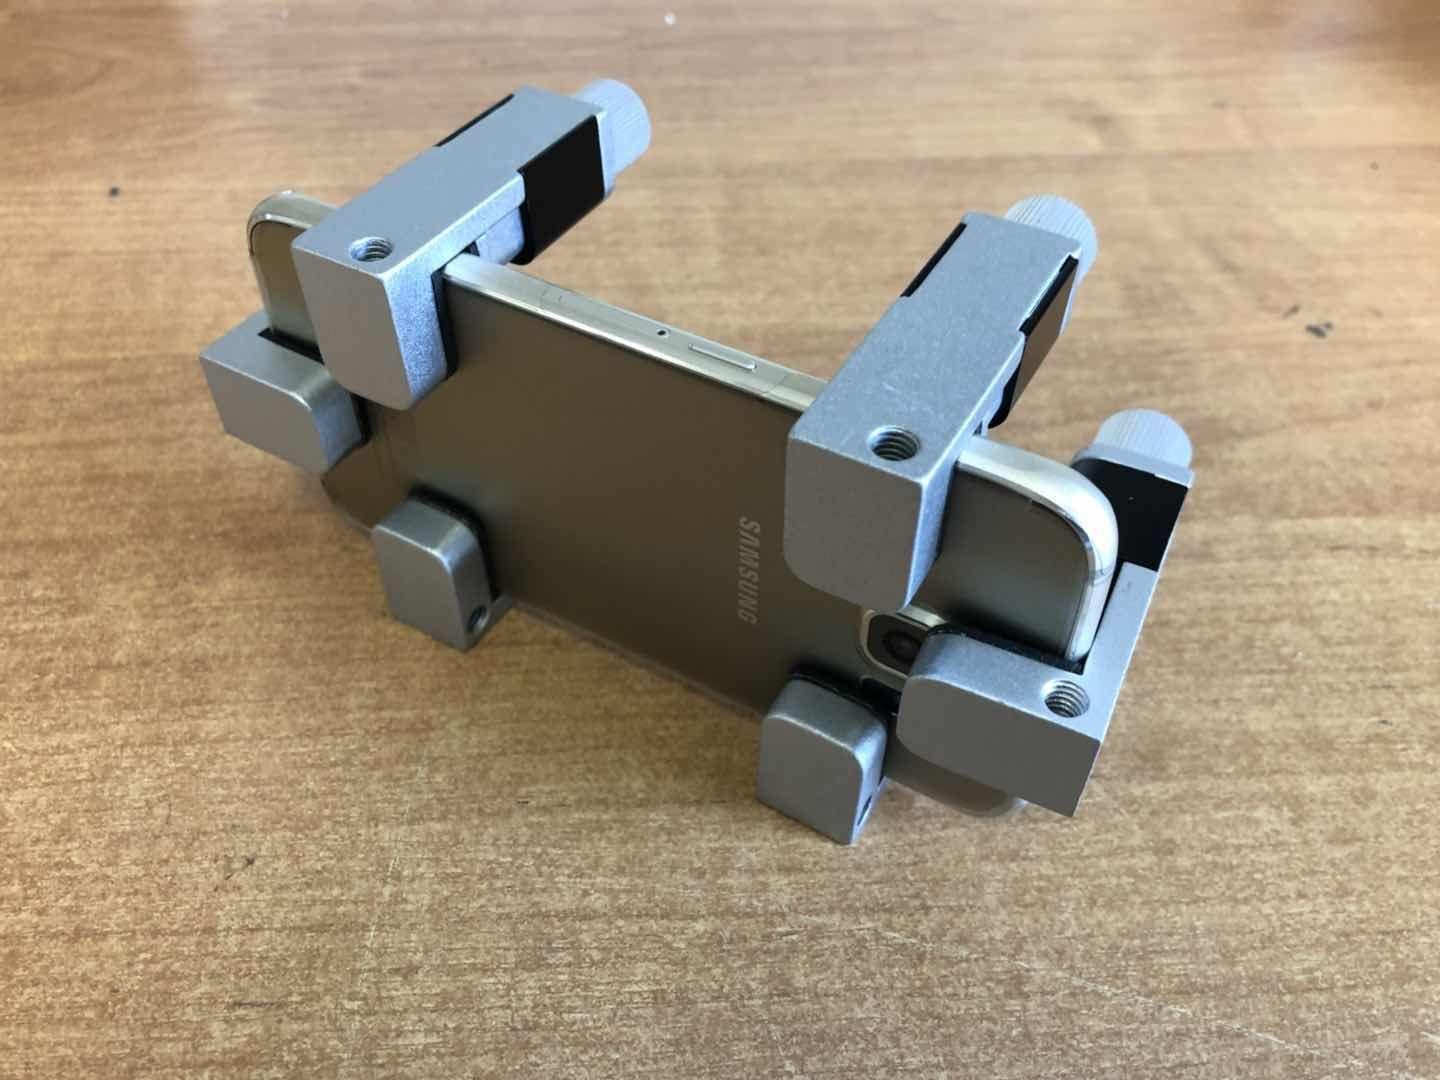 Clamp - regulated holder for mobile phone